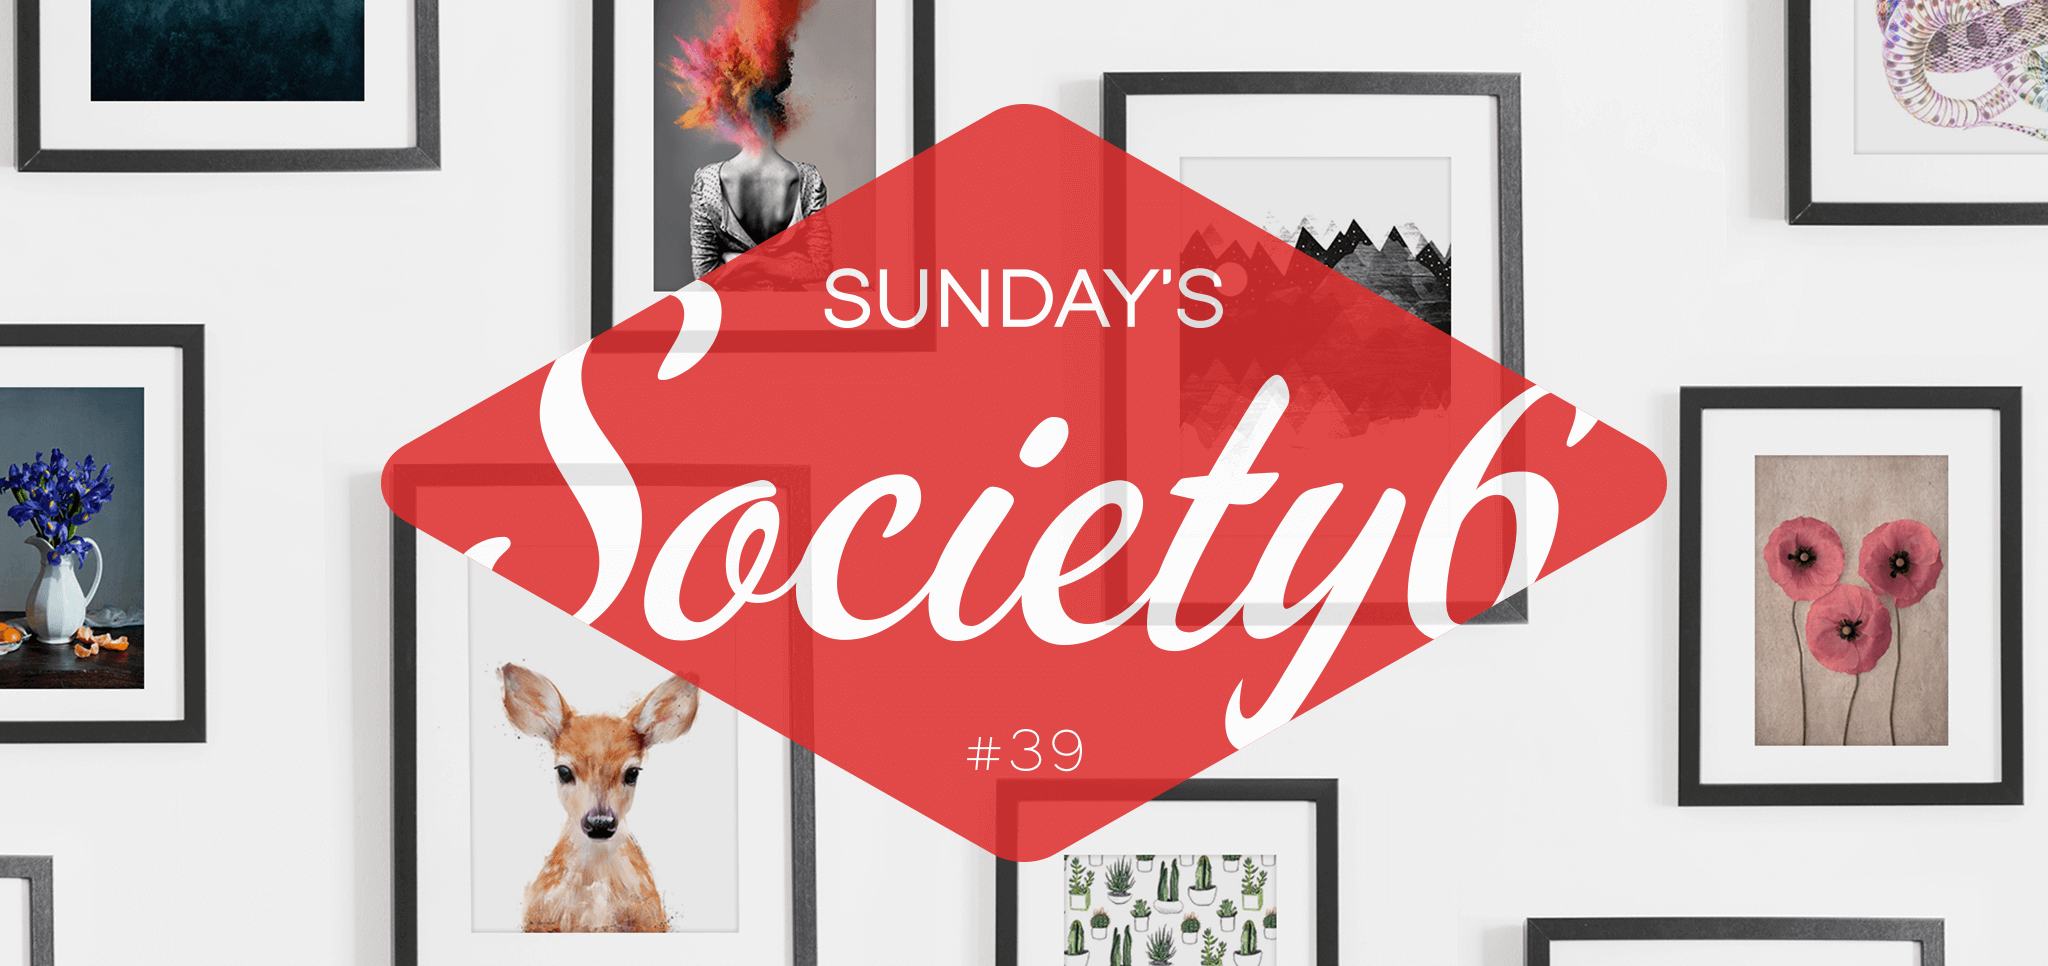 Sunday’s Society6 #39 | Watercolor view